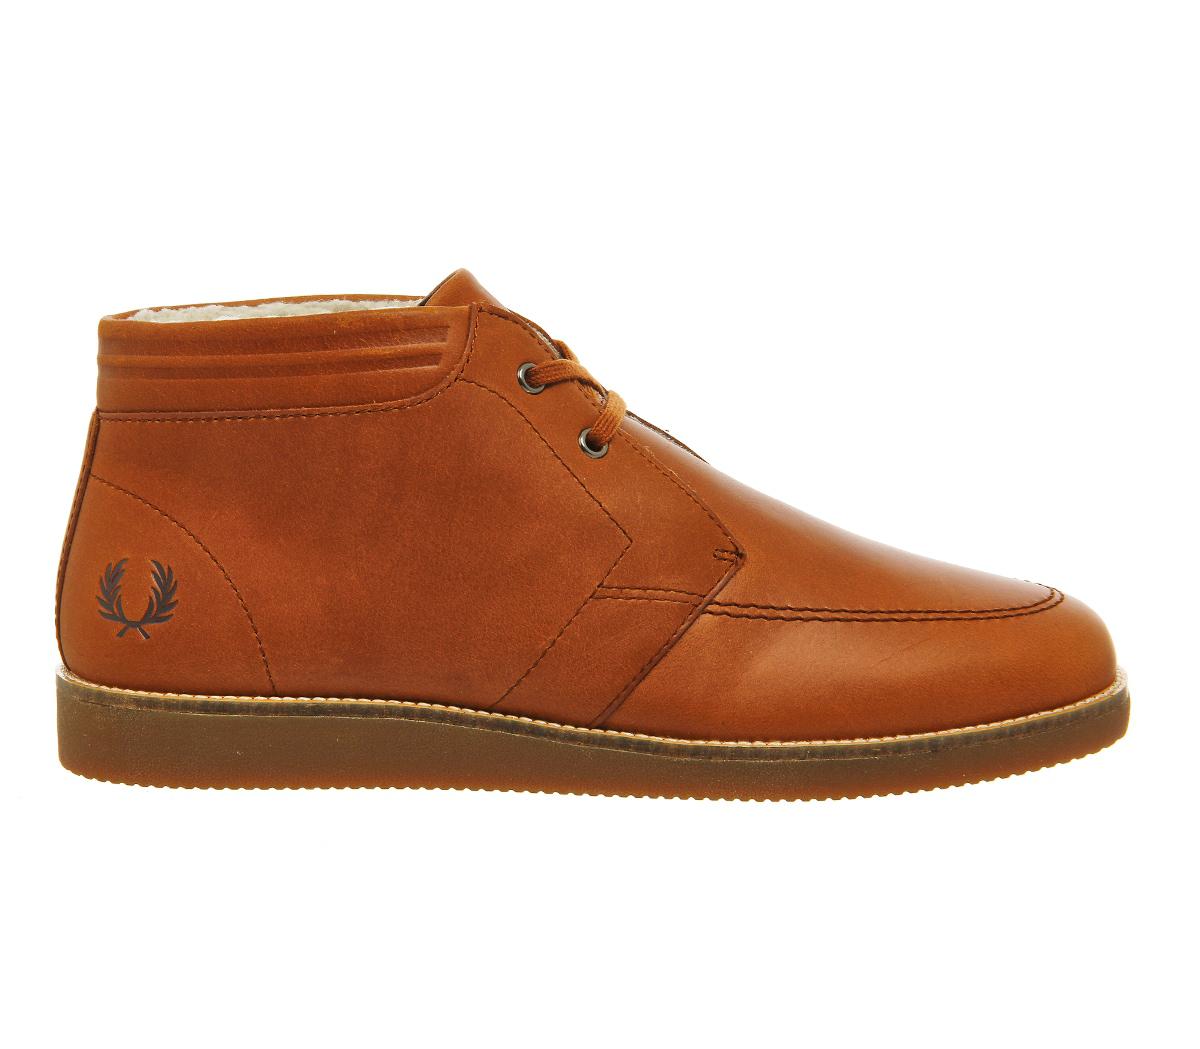 Fred Perry Leather Southall Mid Chukka Boots in Tan (Brown) for Men - Lyst